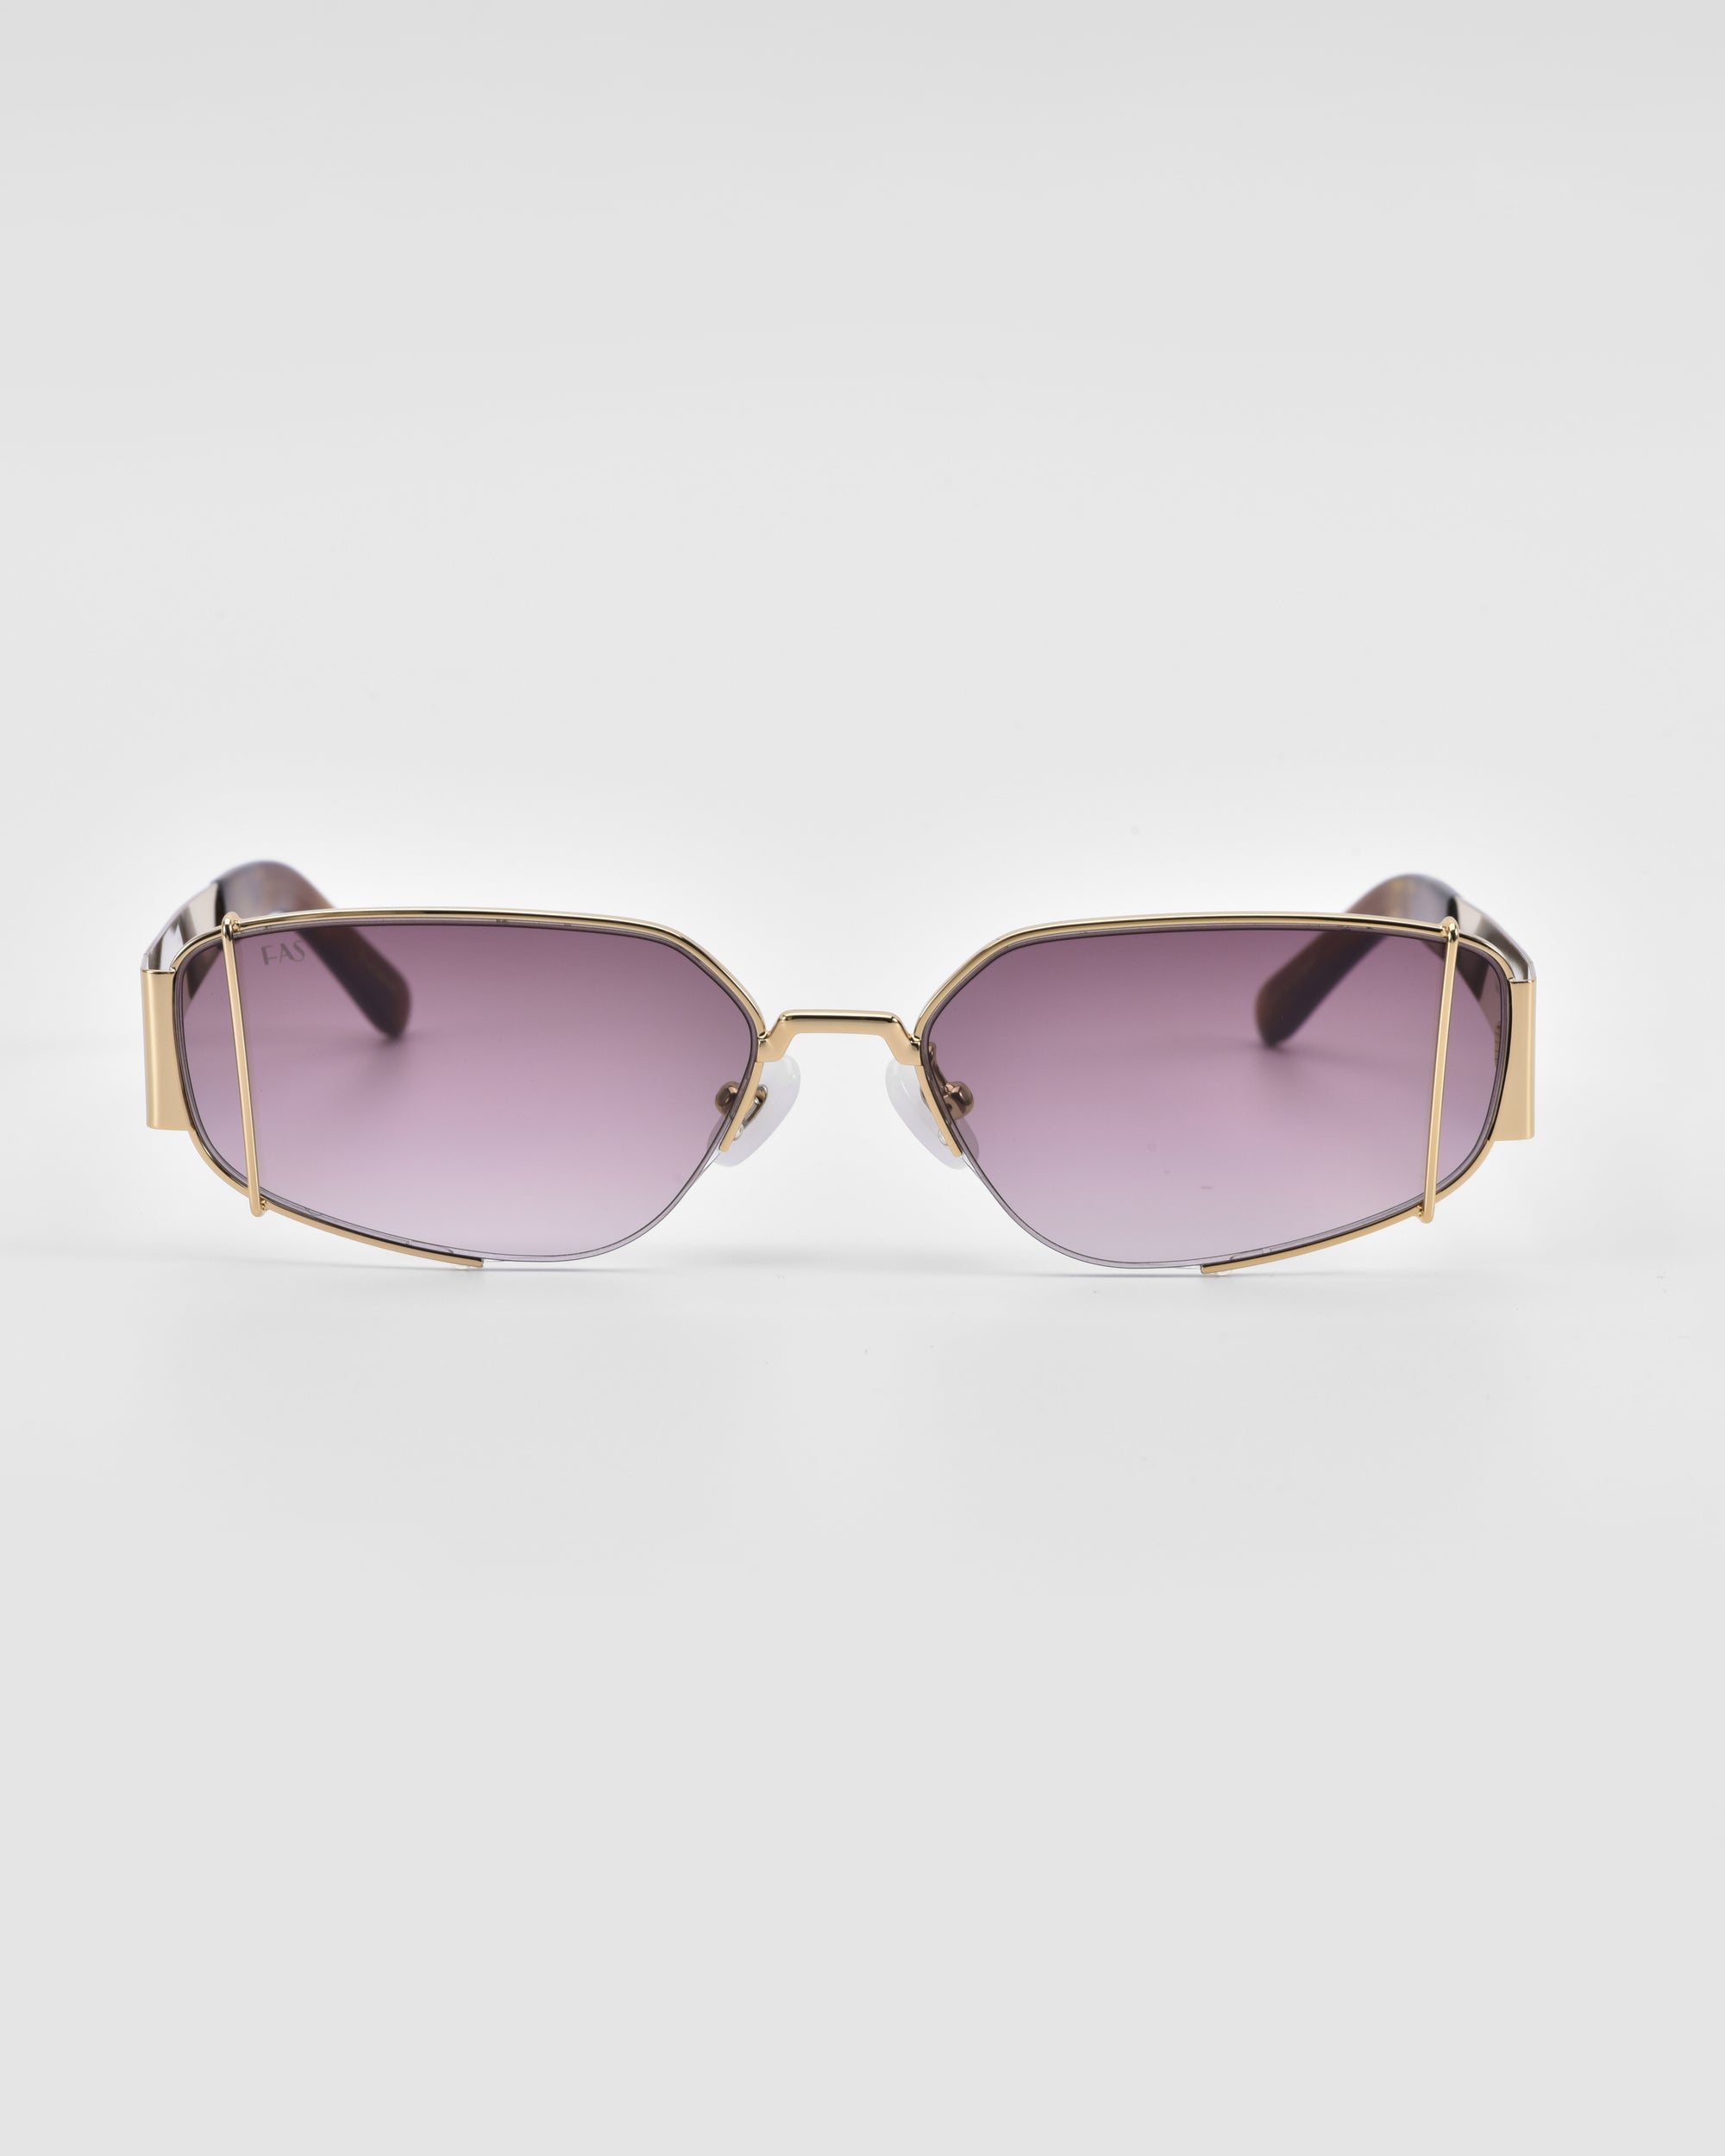 A pair of For Art&#39;s Sake® Talia sunglasses with purple-tinted lenses and a unique geometric metal frame. The frame, finished in 18-karat gold, features an angular design, giving the sunglasses a modern and edgy look. The background is plain white.